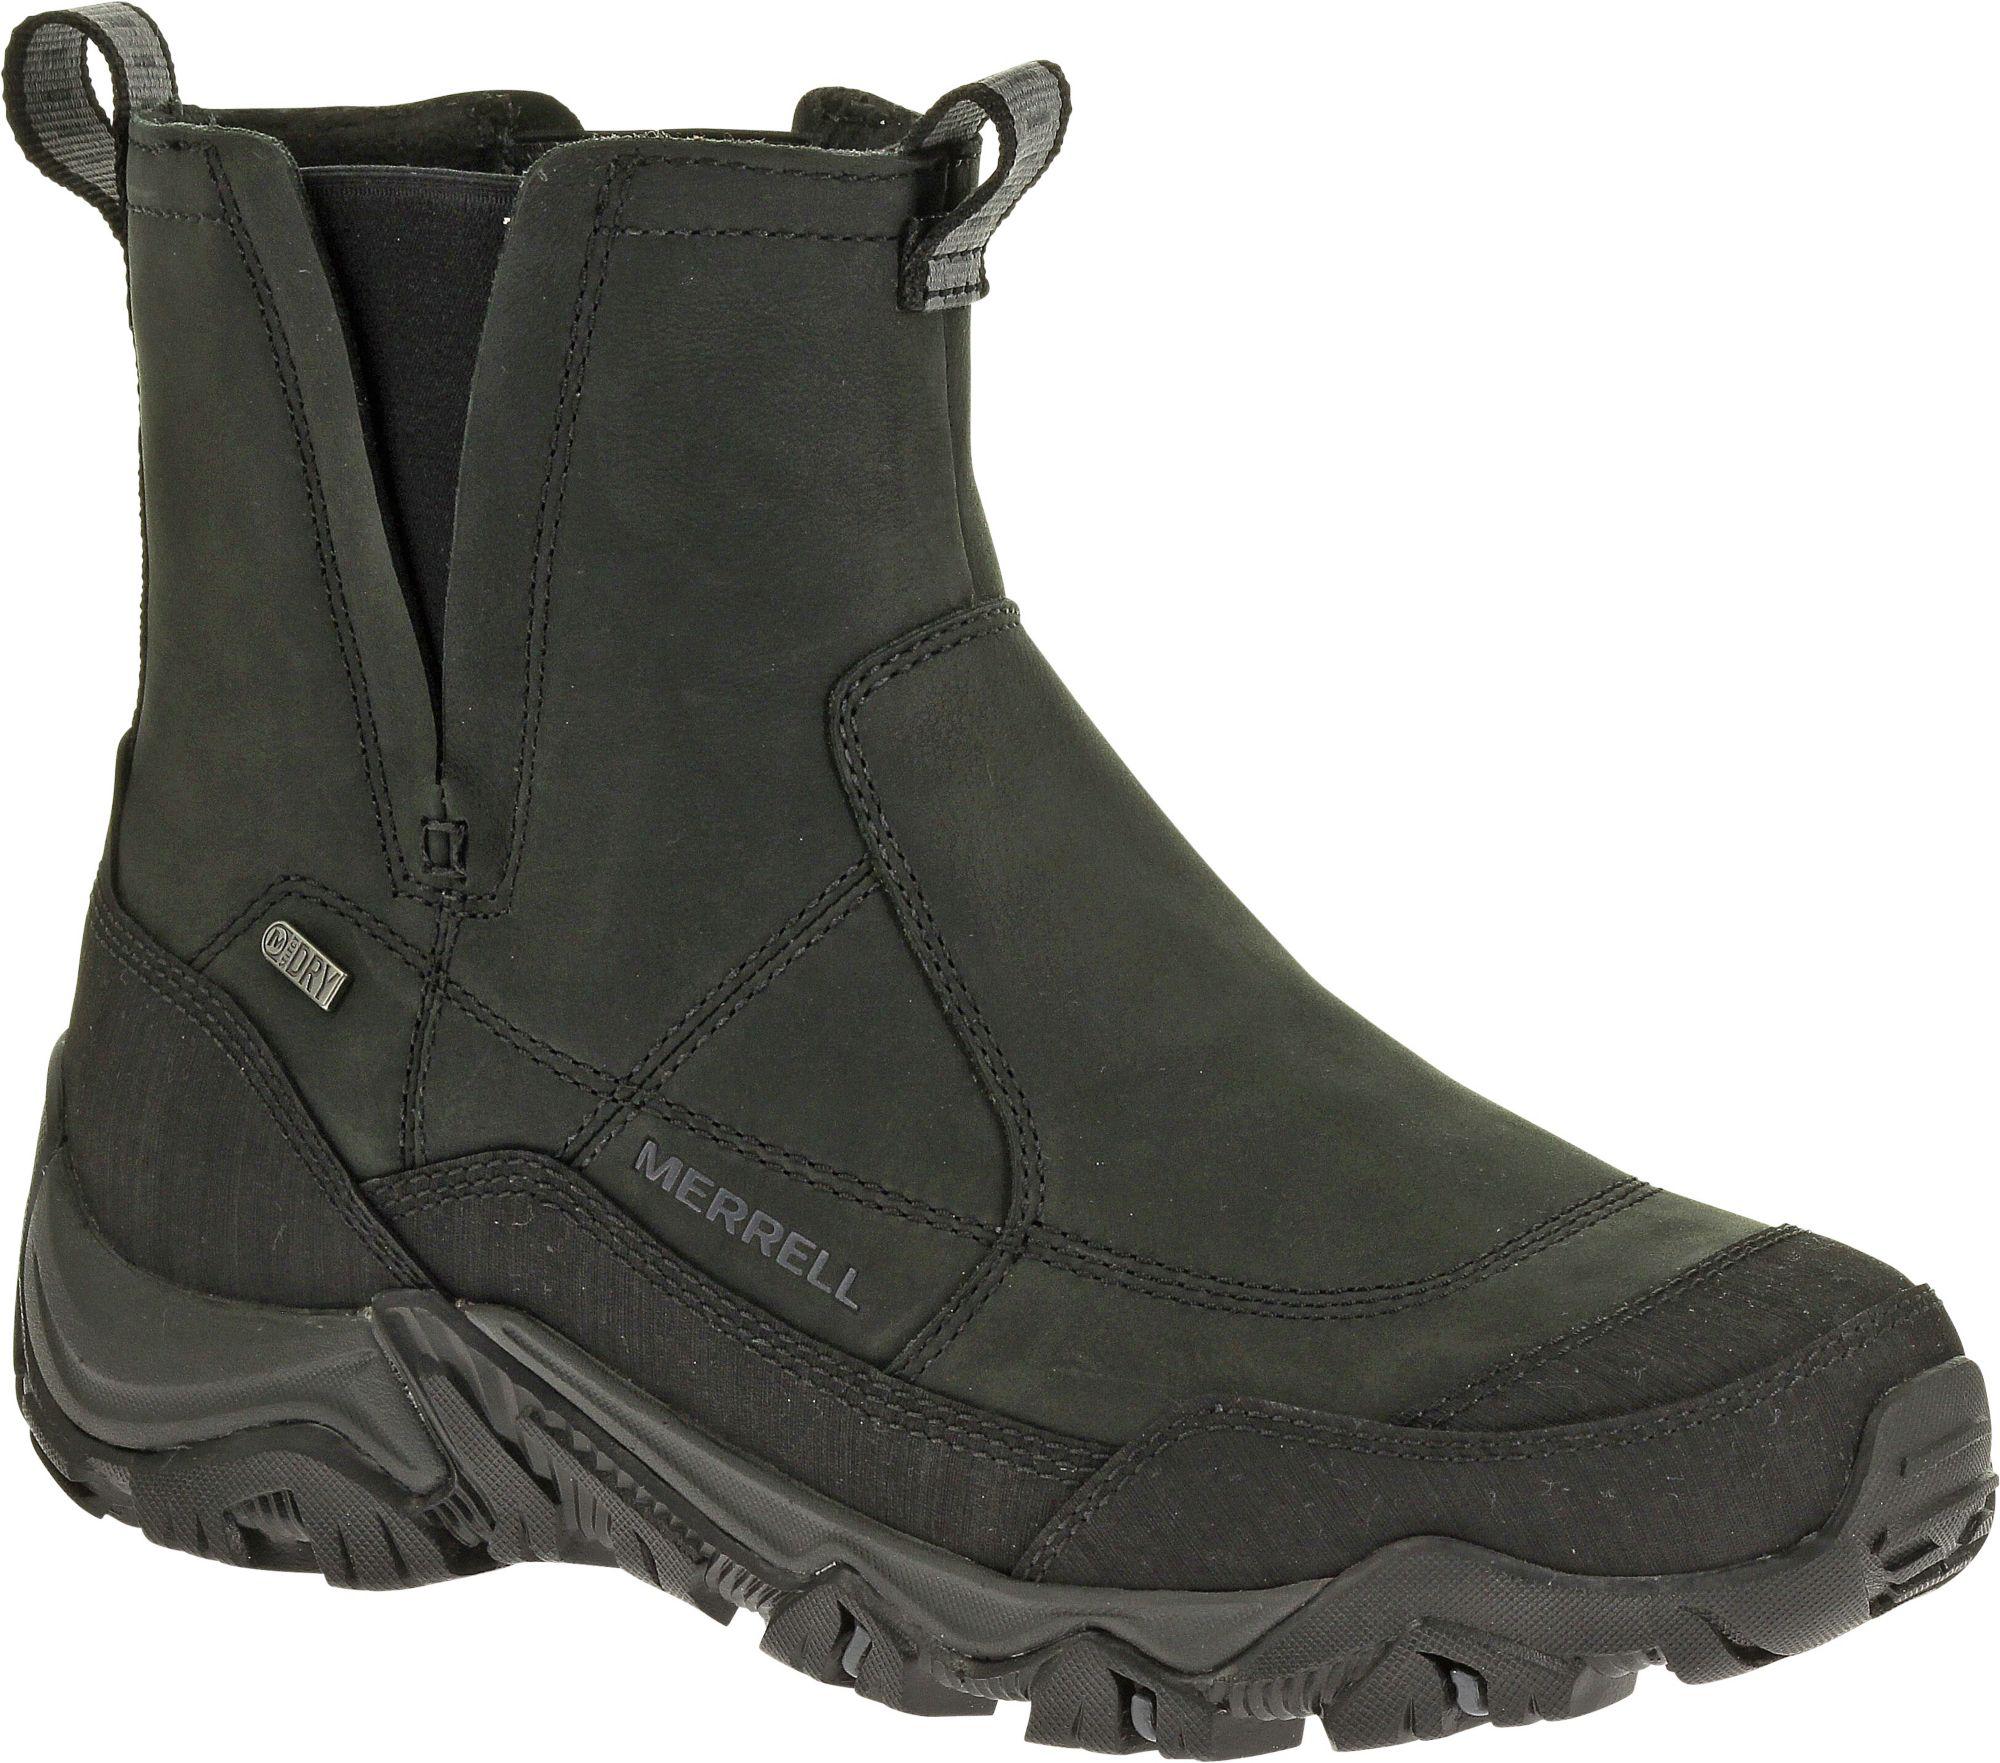 Merrell Leather Polarand Rove Waterproof 200g Pull-on Winter Boots in ...